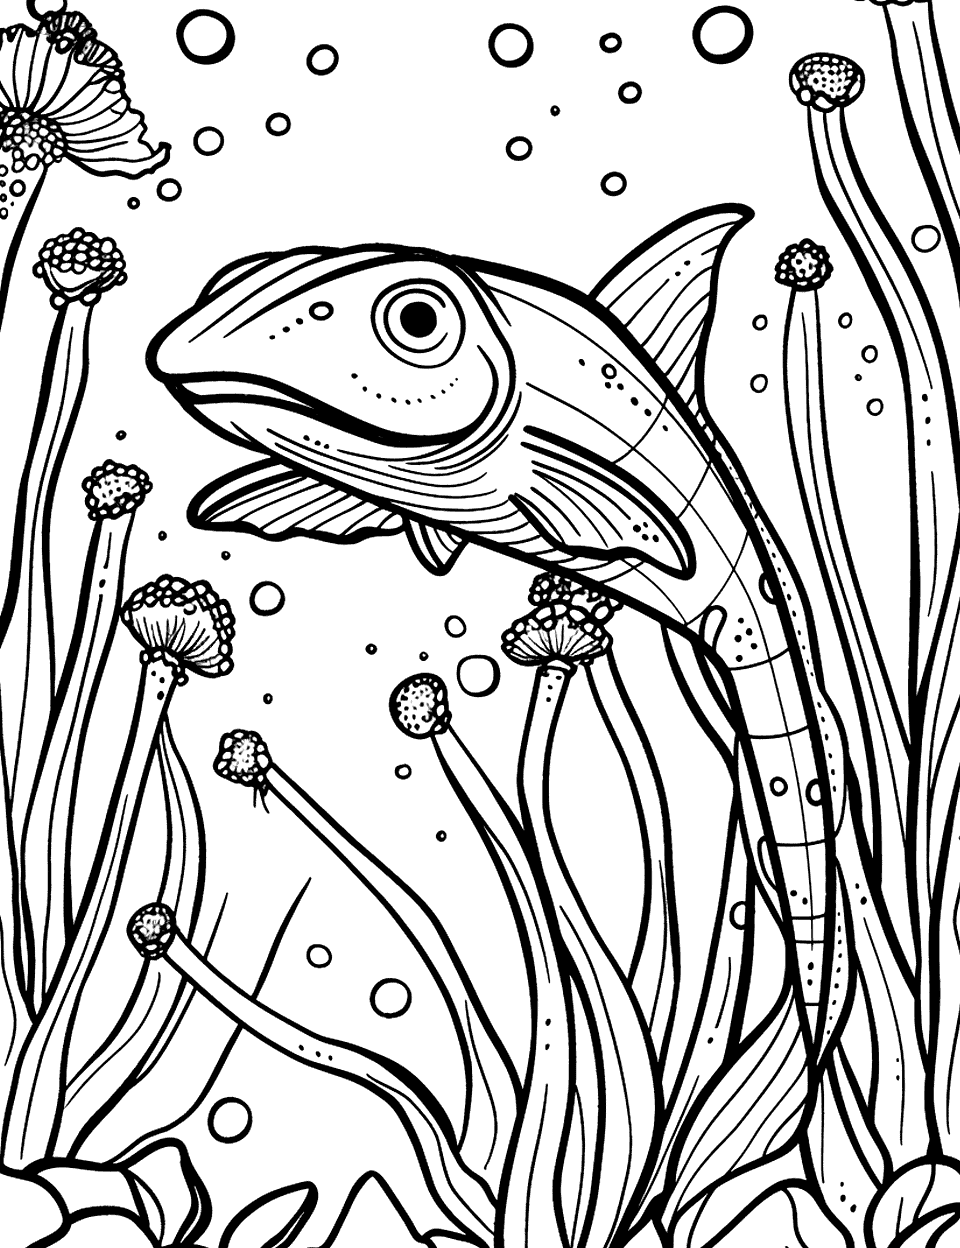 Electric Eel Hiding Among Plants Sea Creature Coloring Page - An electric eel camouflages itself within the dense aquatic plants.